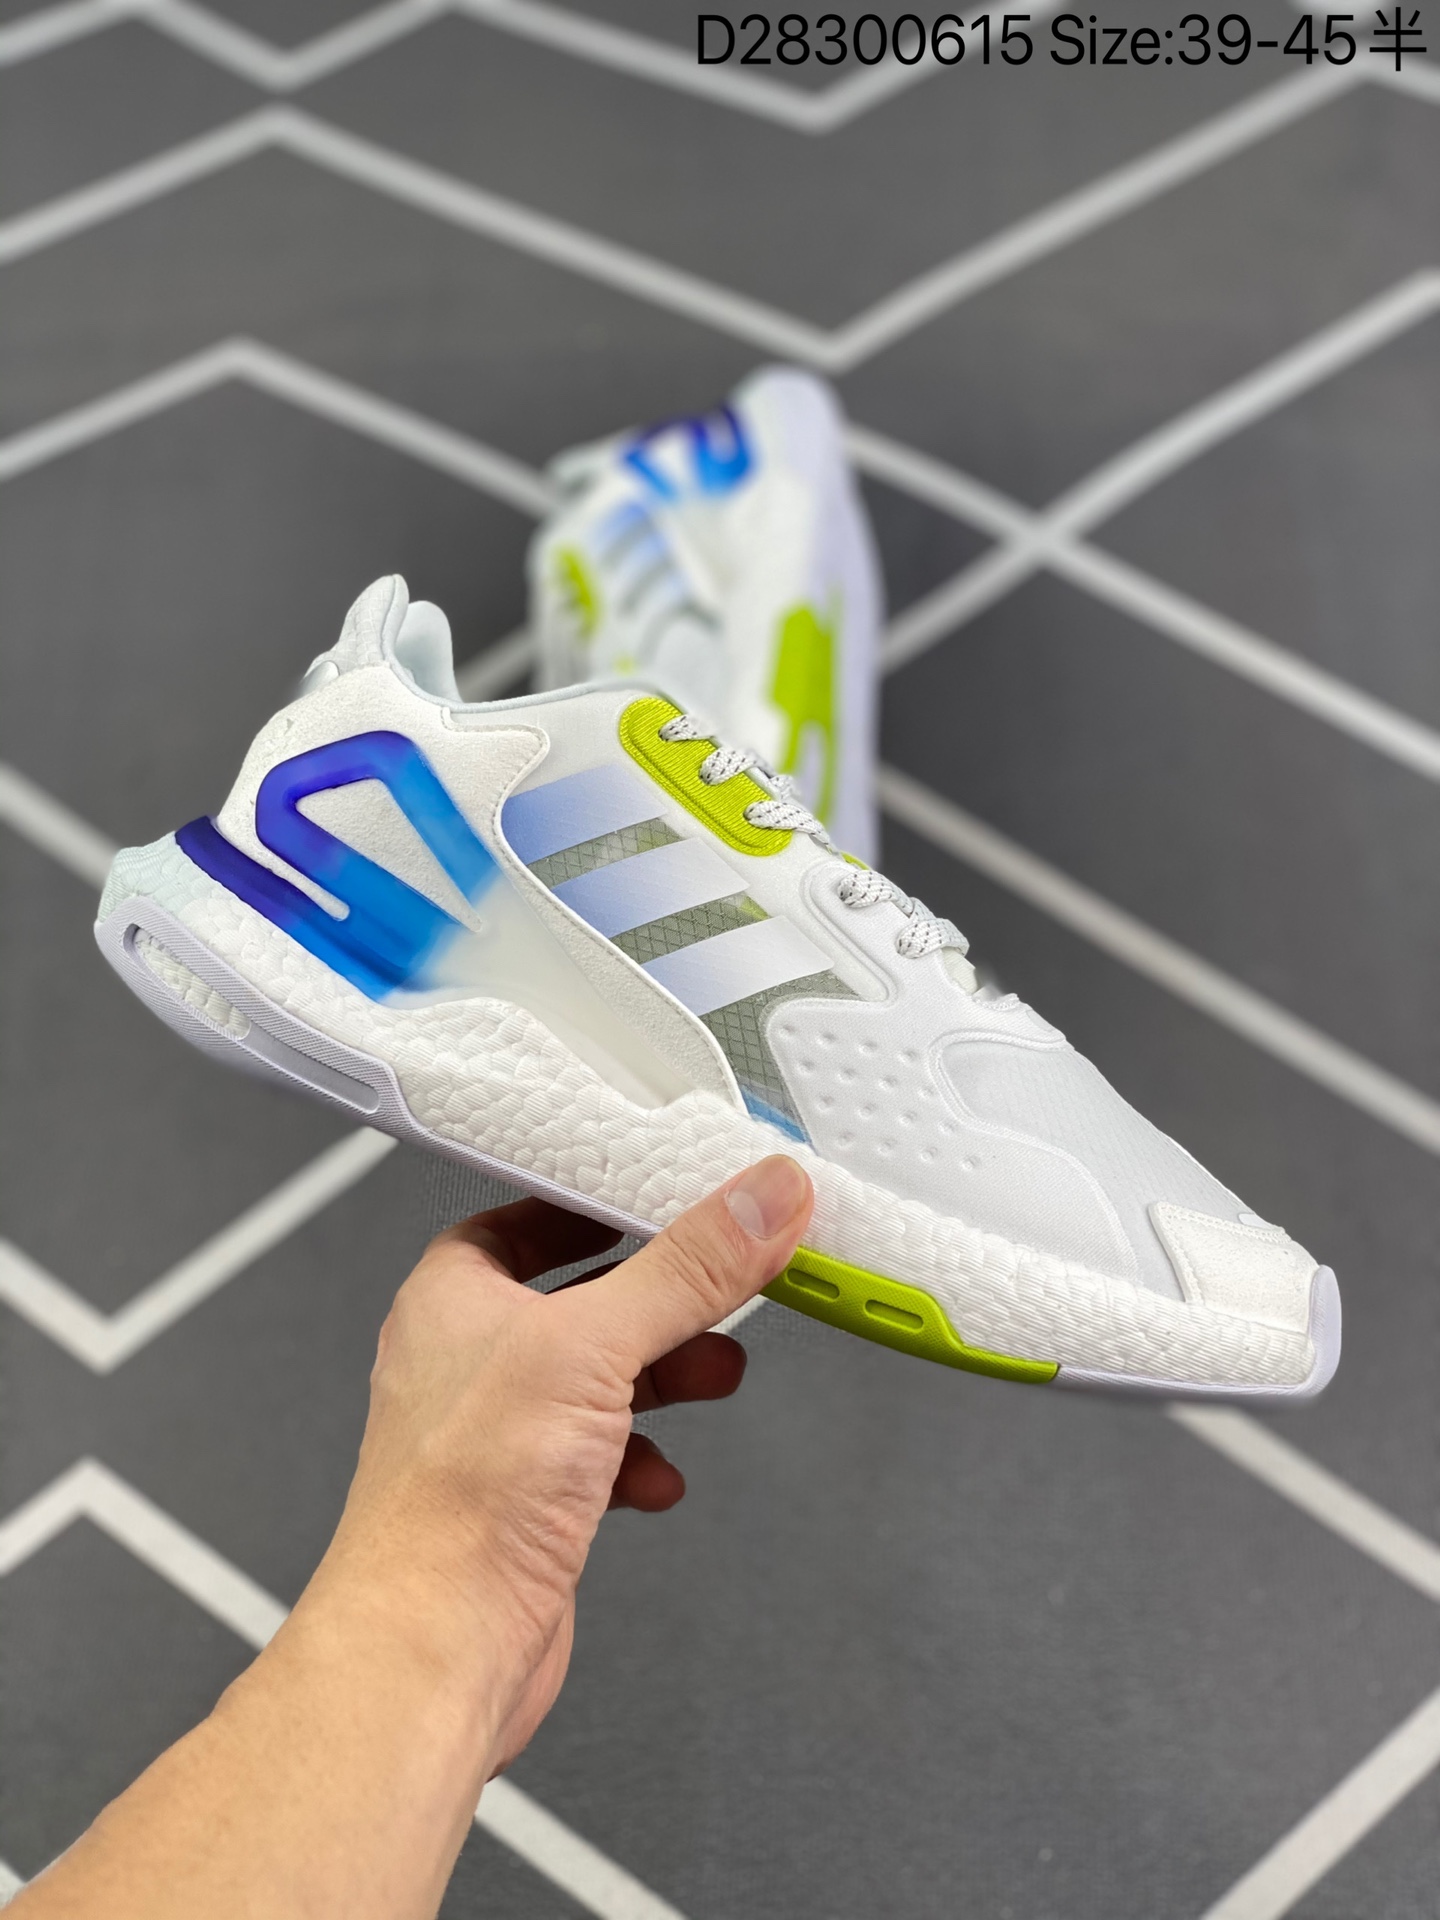 adidas Originals 2020 Day Jogger Boost"White/Green/Yellow"100% Original flagship store Shoes sneakers sale authentic original for men women new arrival casual shoes 2022 fashion rubber breathable on design summer train